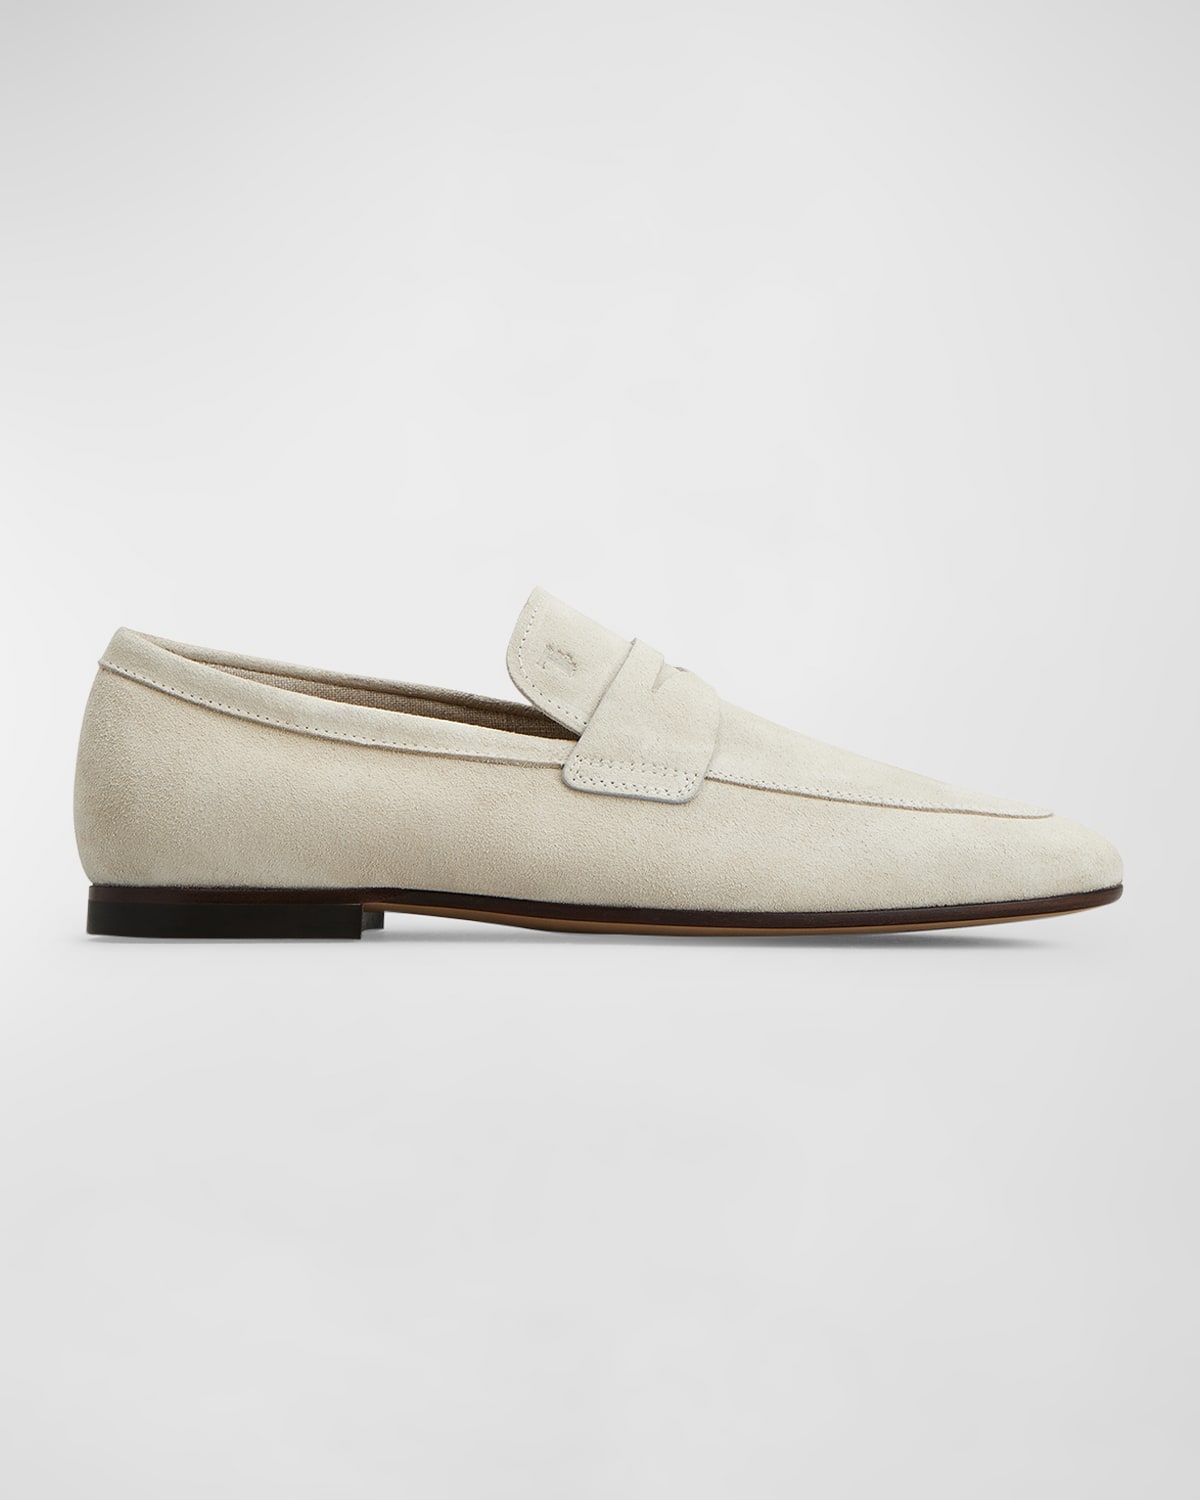 Men's Mocassino Cuoio Suede Penny Loafers